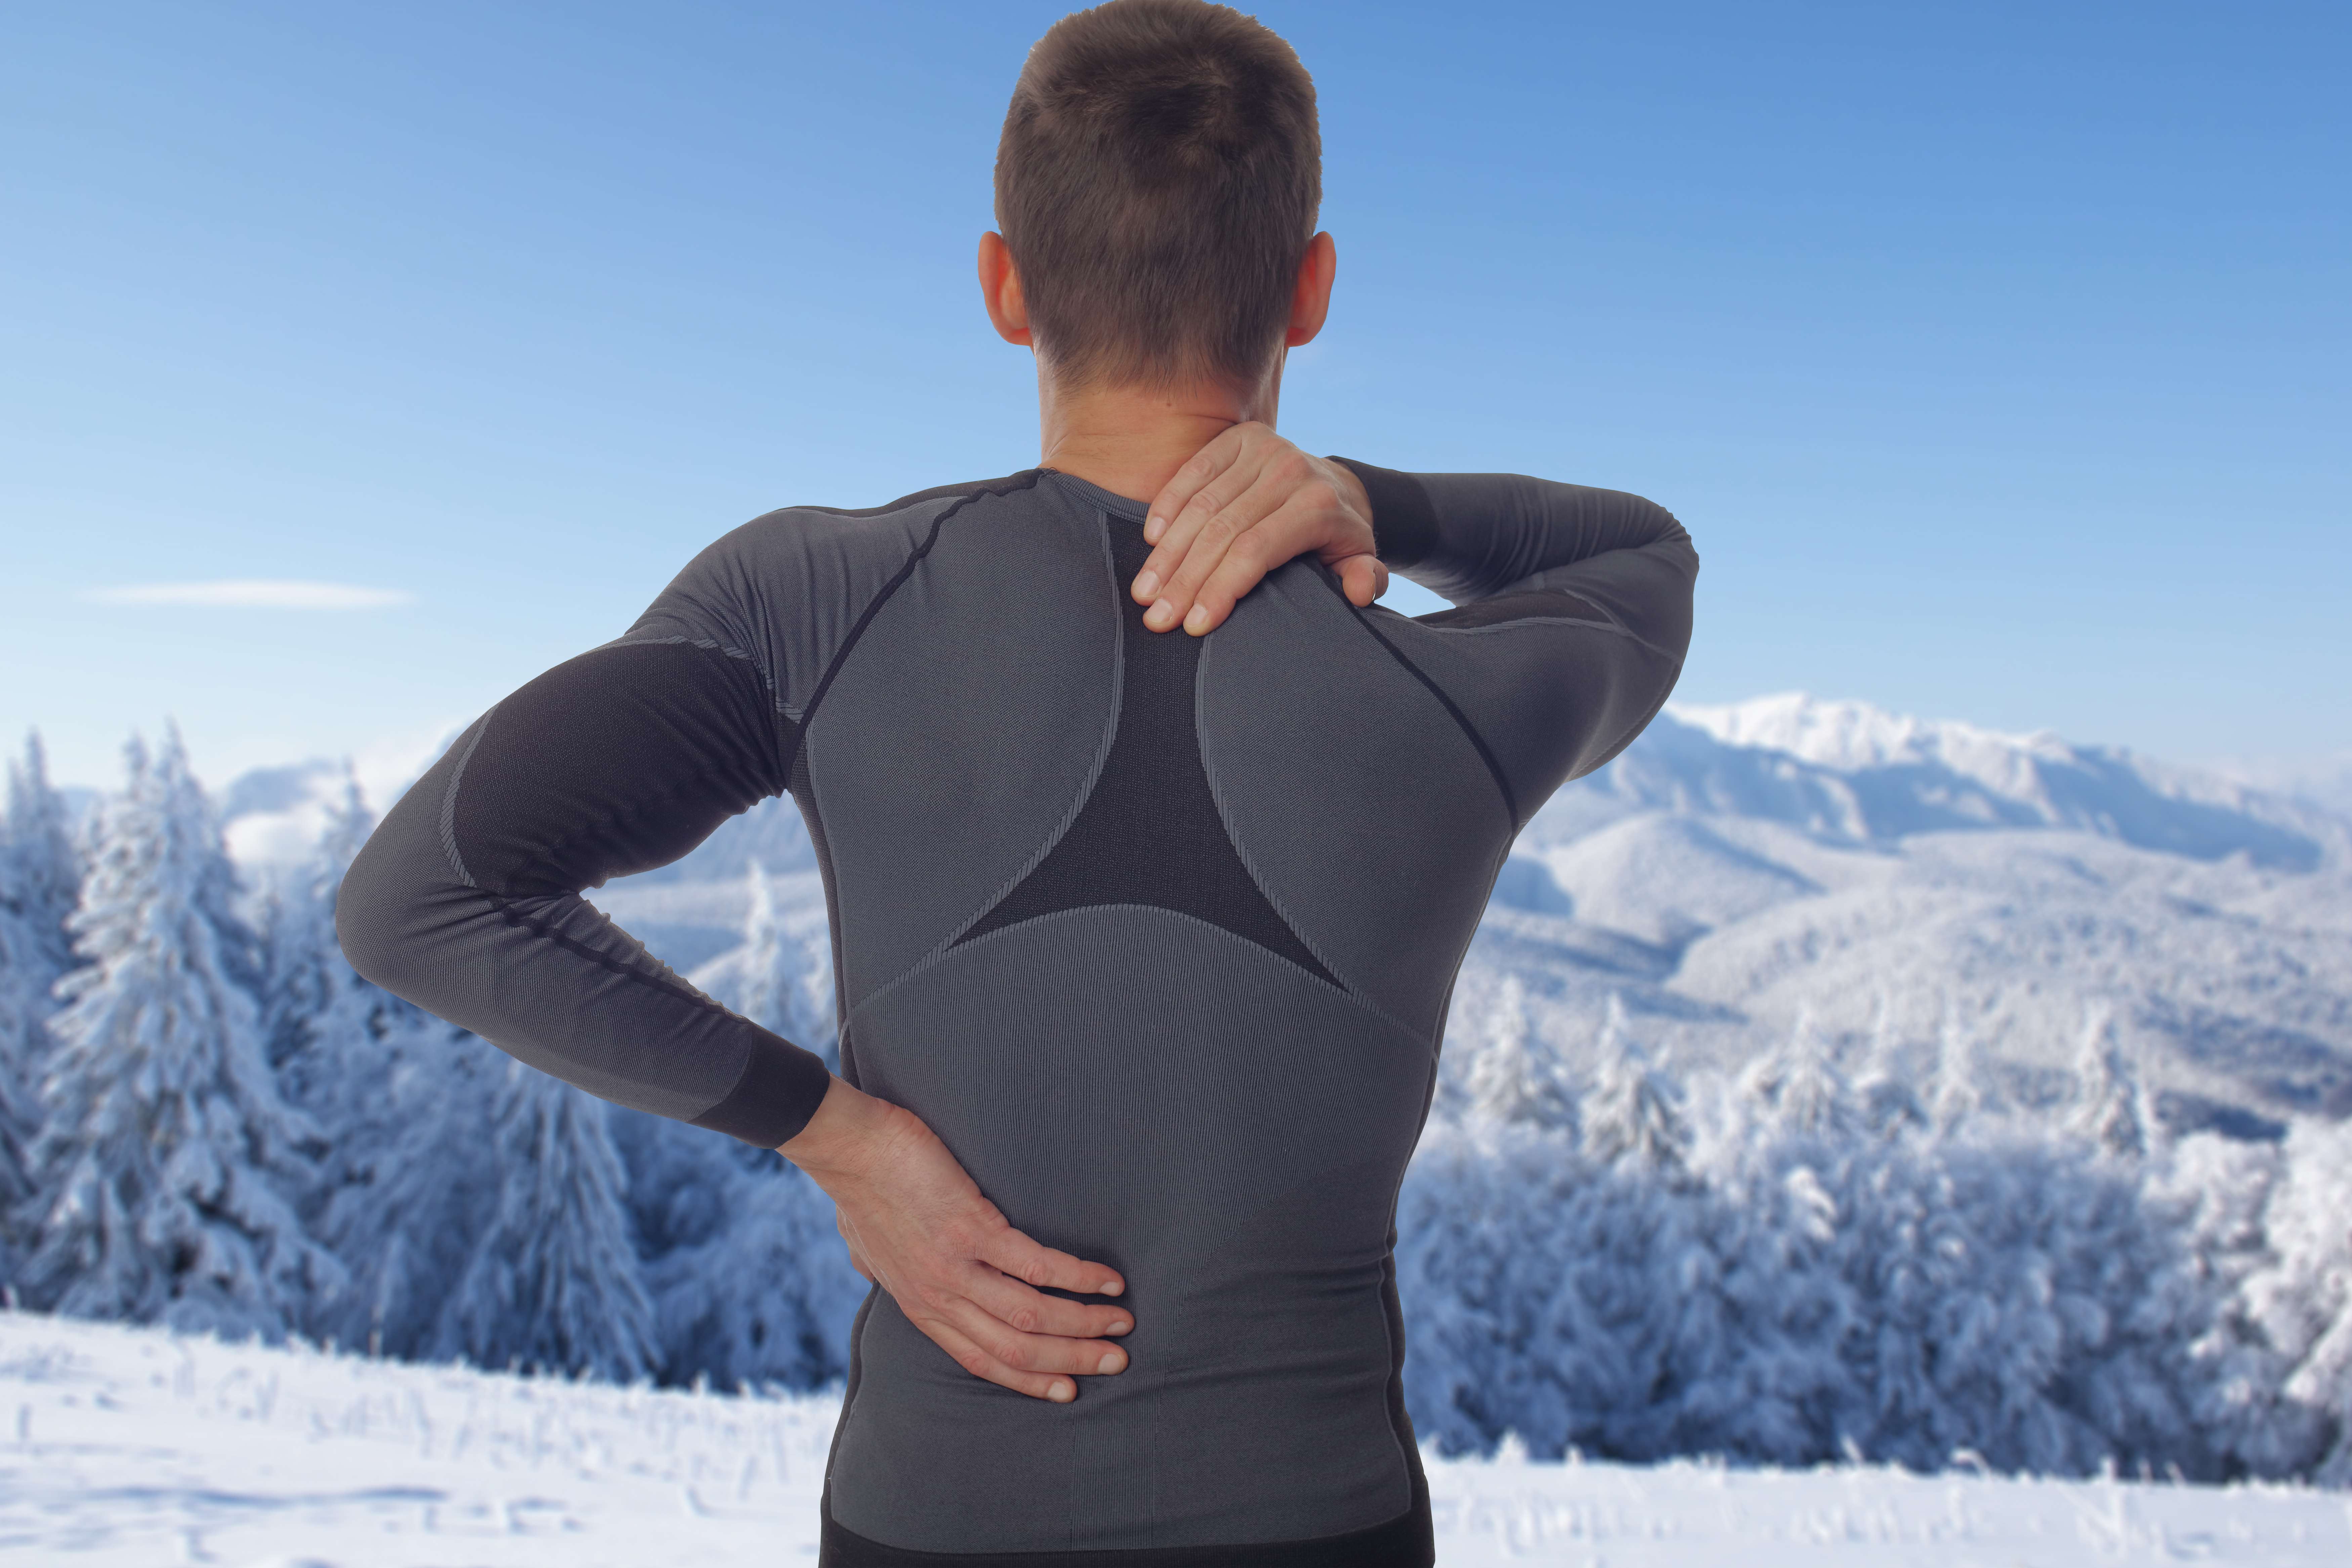 The jury’s still out on whether there’s a link between back pain and impending cold and rain.